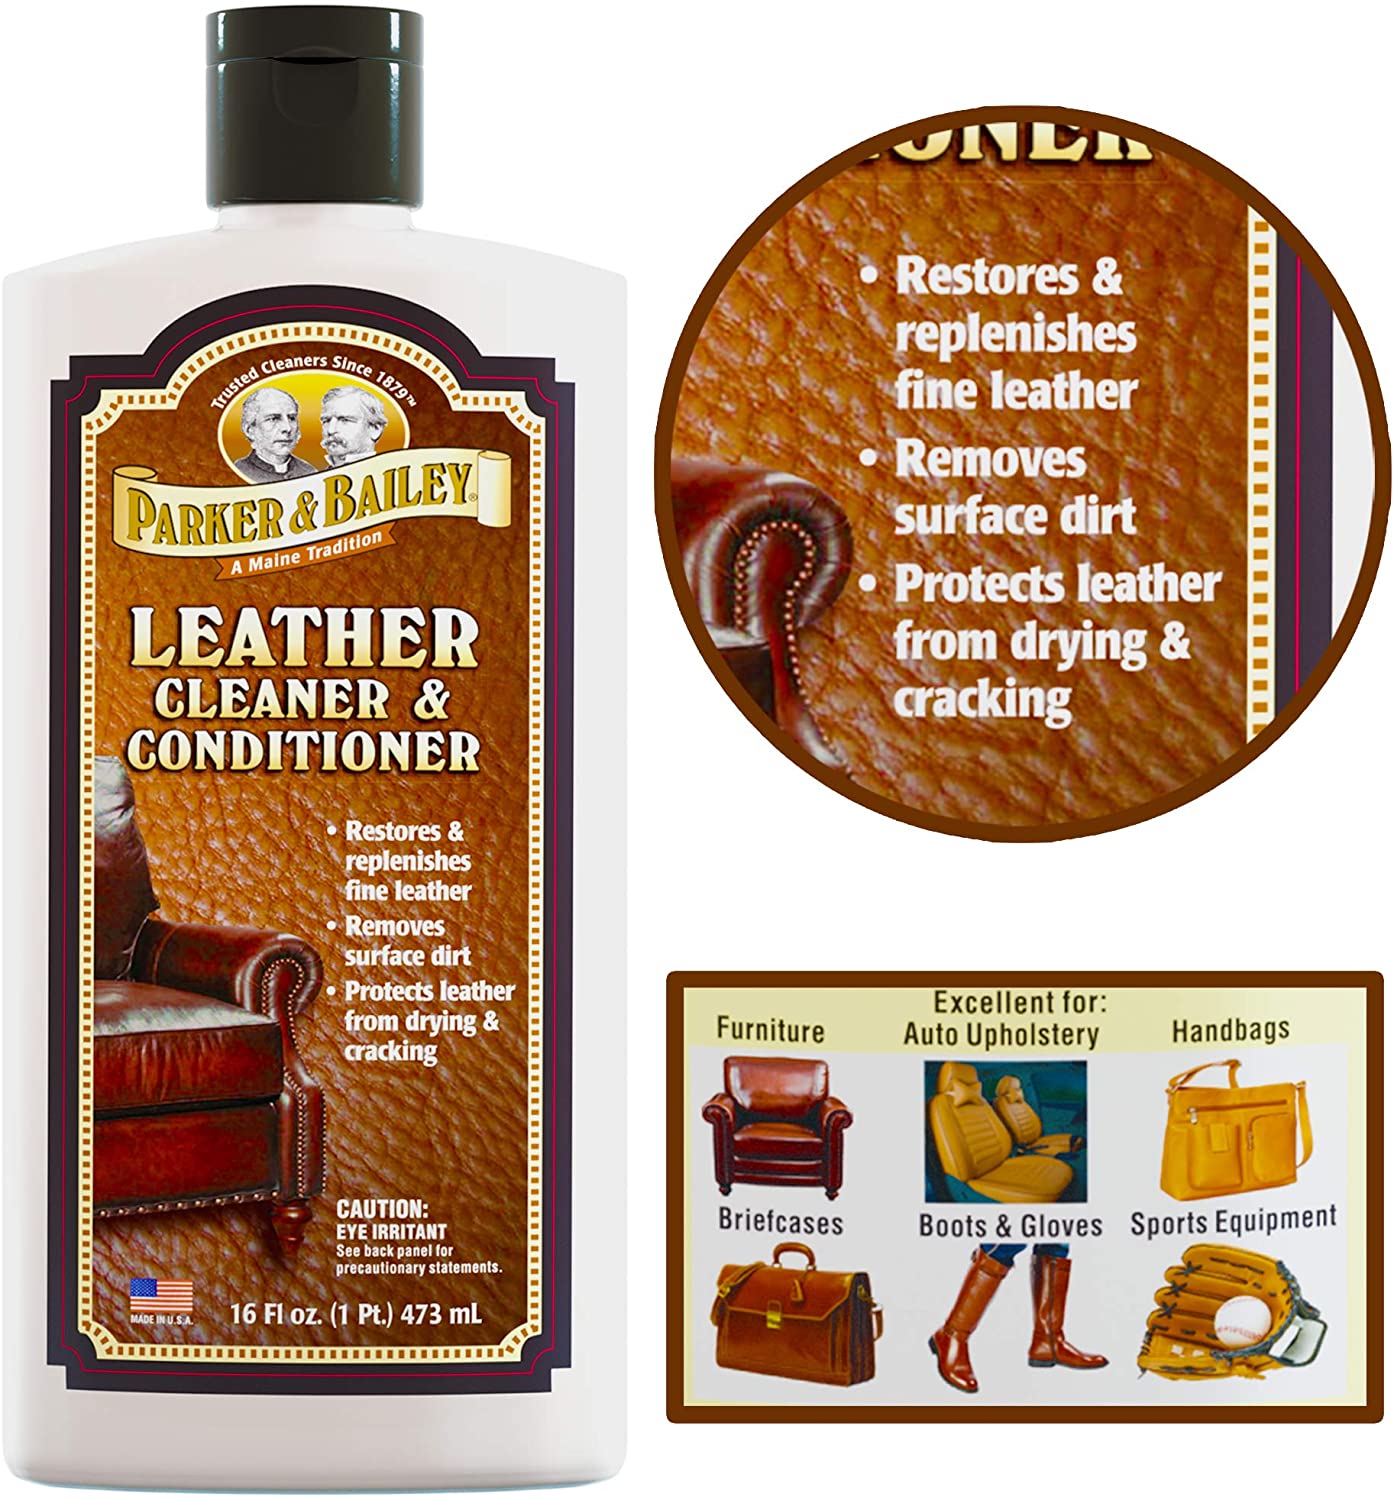 Leather Conditioner ad Cleaner